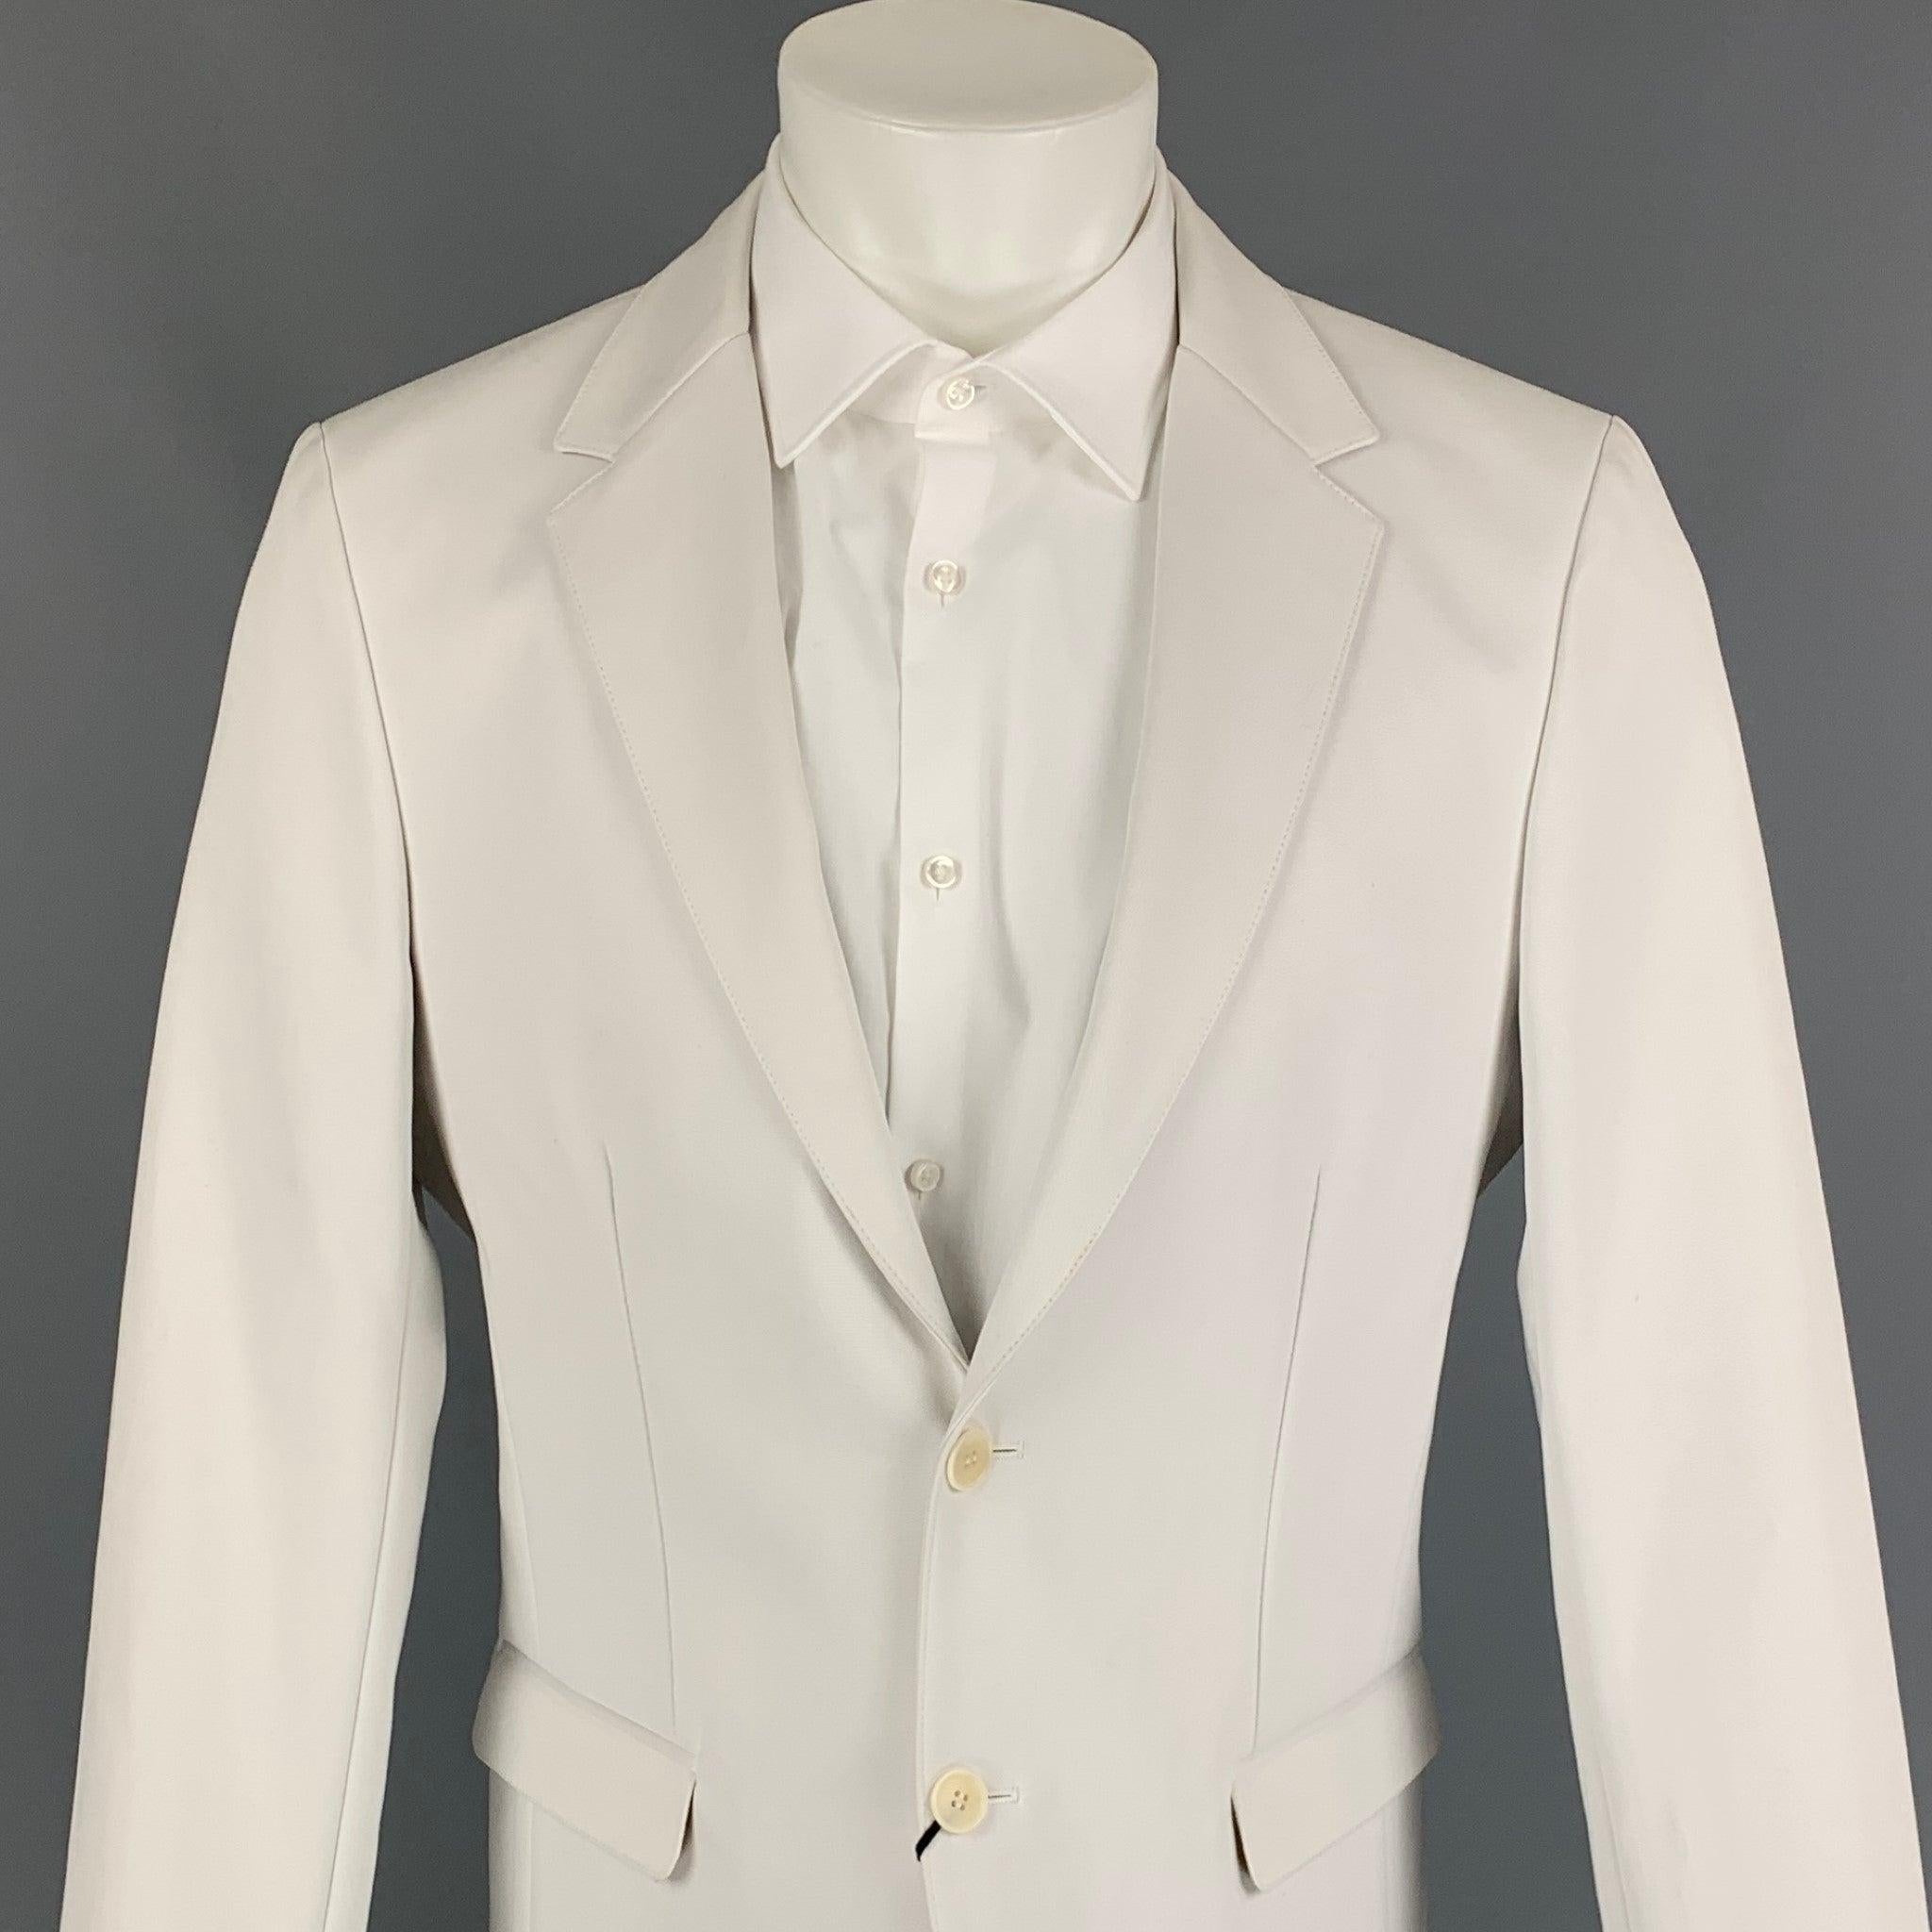 CALVIN KLEIN COLLECTION sport coat comes in a off white cotton featuring a notch lapel, flap pockets, and a double button closure.
New With Tags.
 

Marked:   50/40 

Measurements: 
 
Shoulder: 18 inches  Chest: 40 inches  Sleeve: 26 inches  Length: